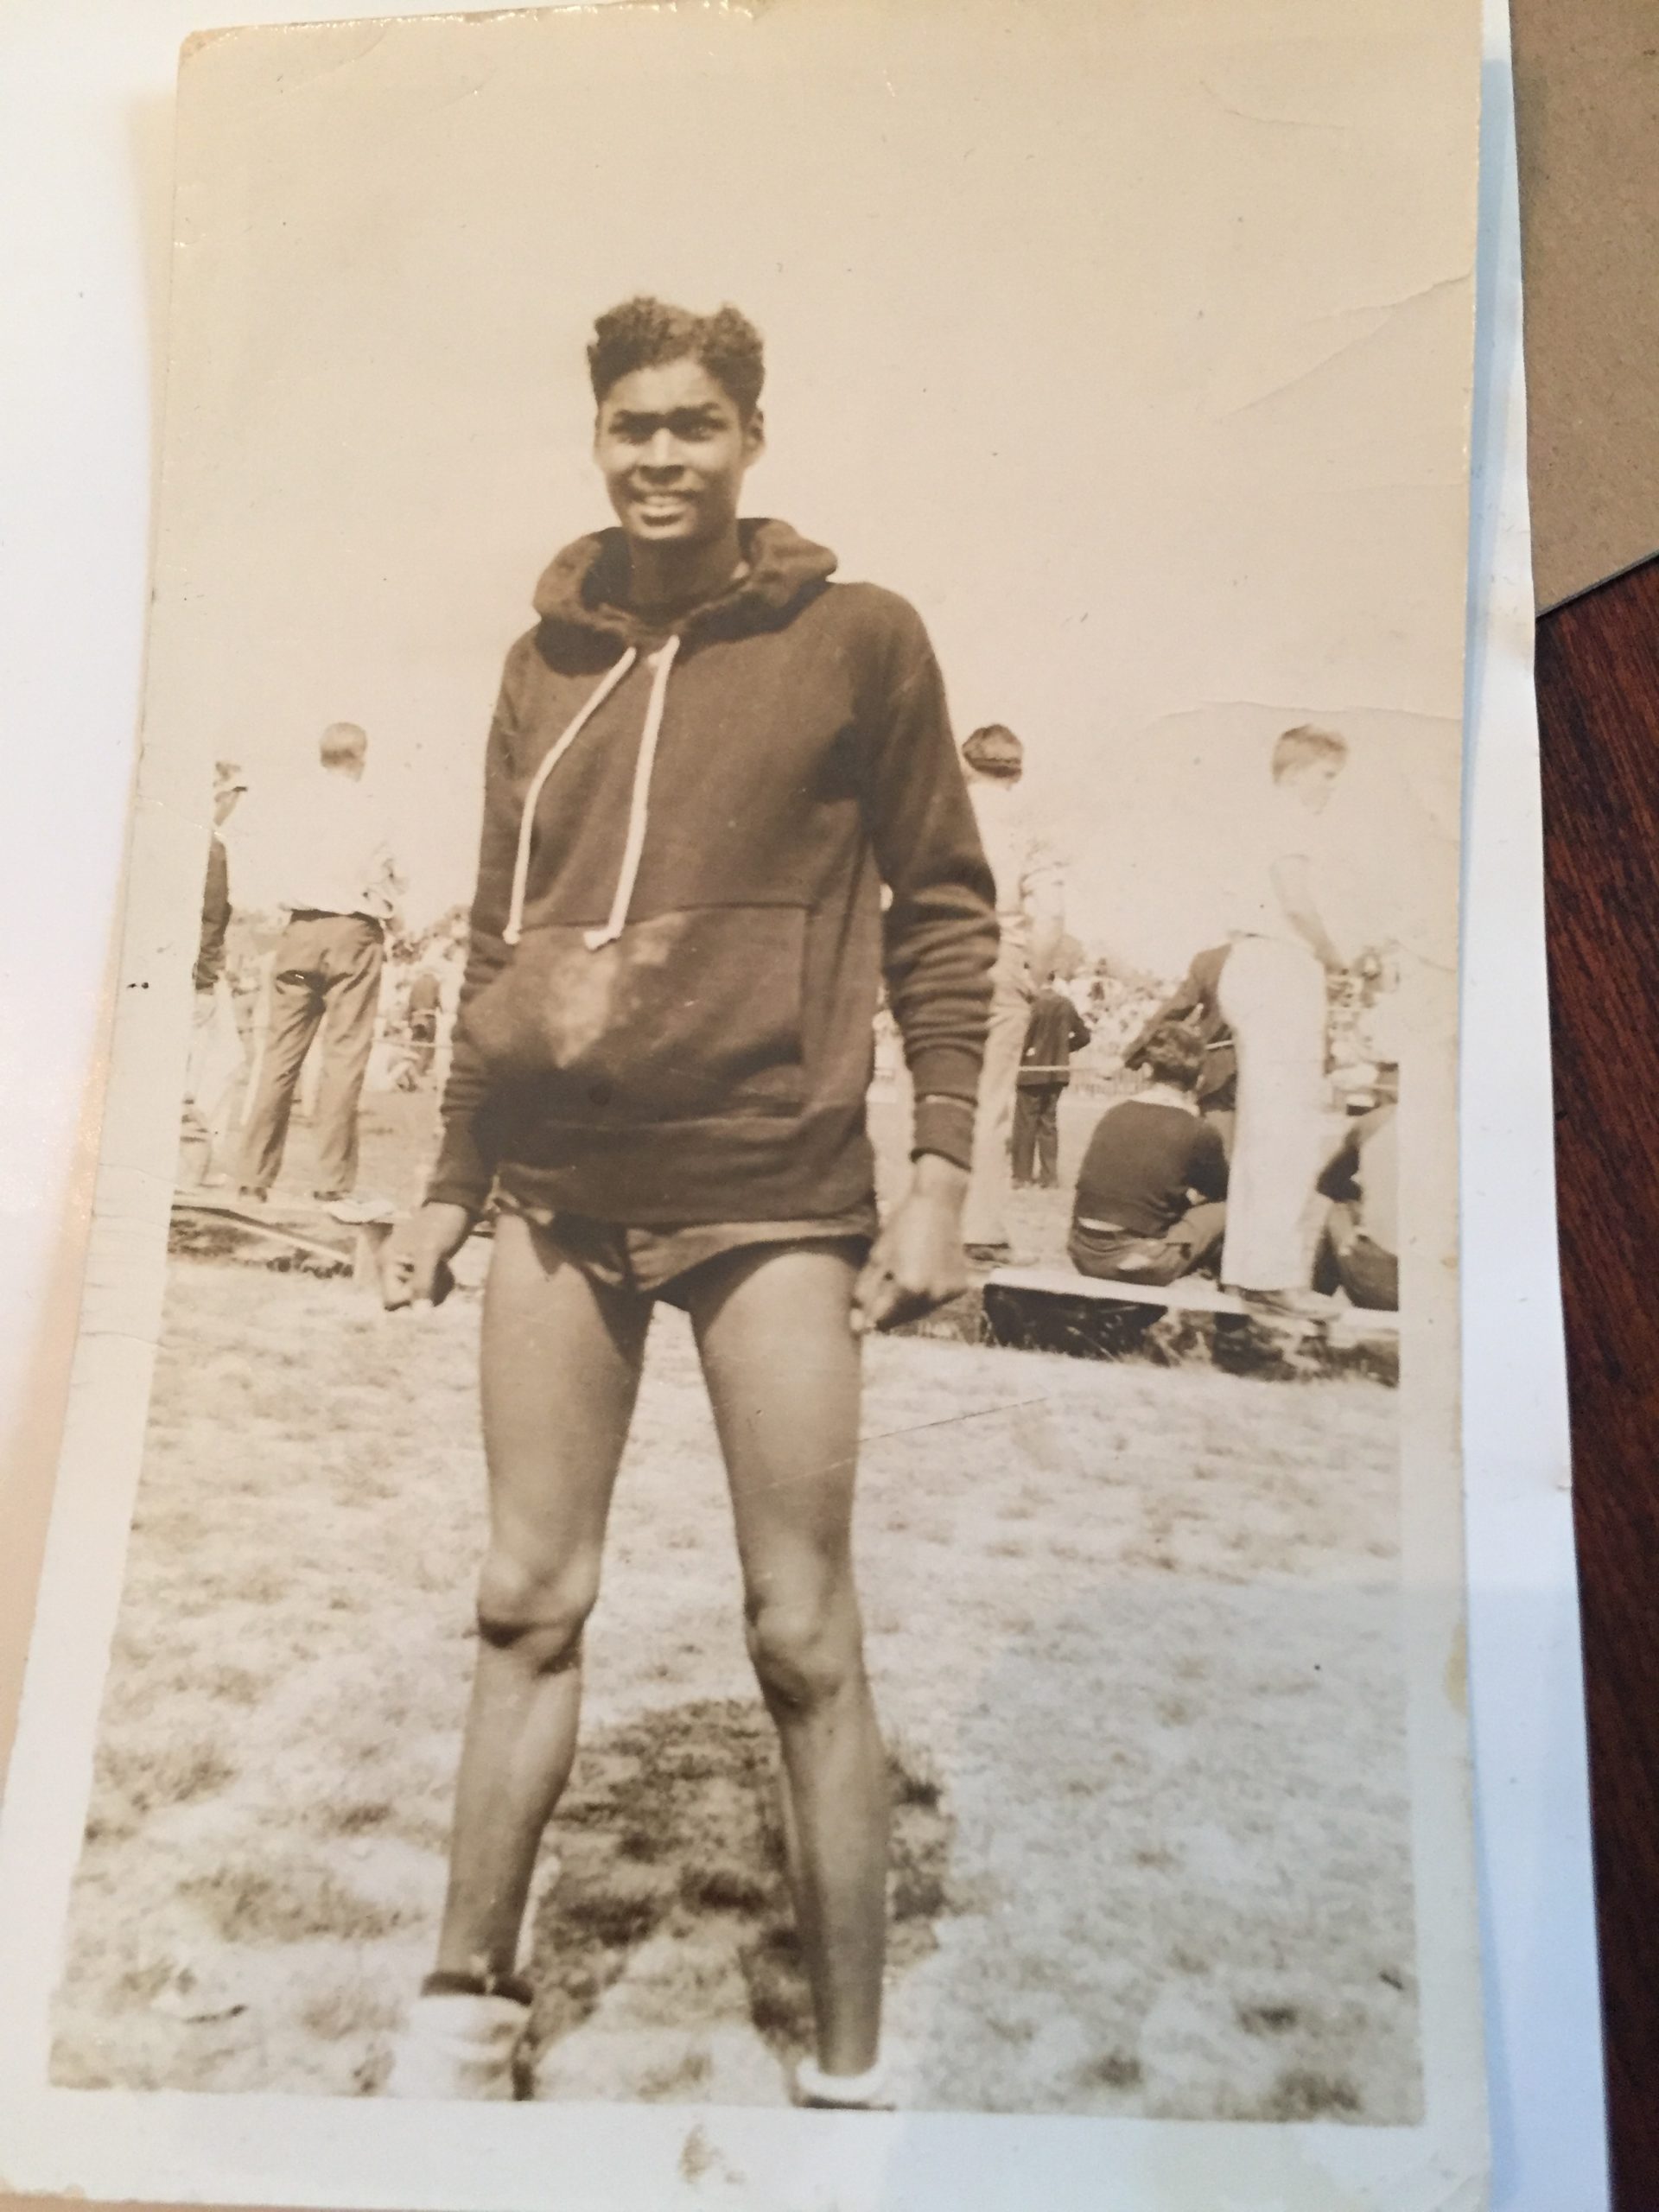 Lubin Hunter was the captain of the Southampton High School cross country team in 1936.